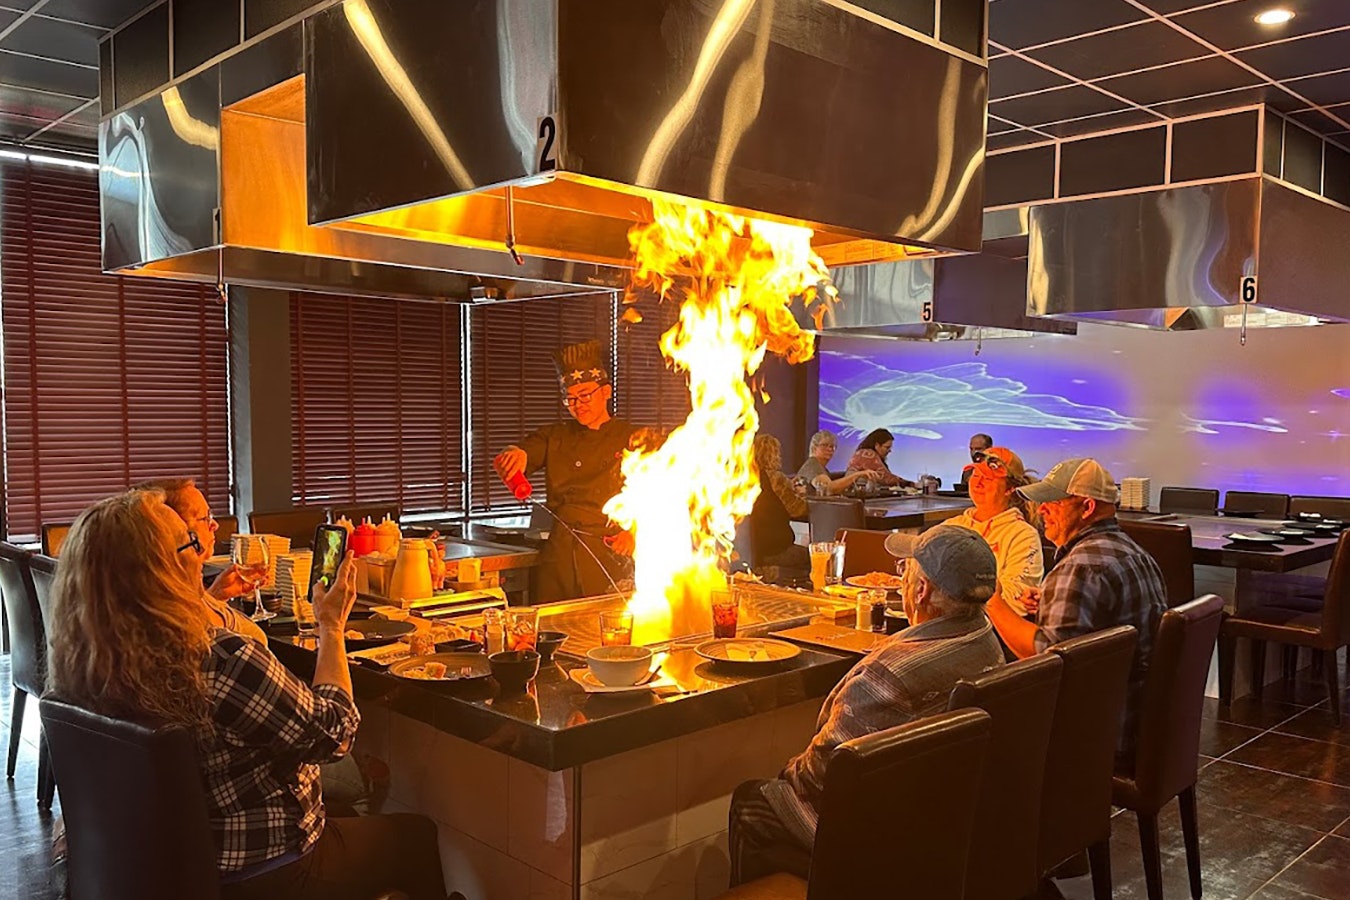 An experience at one of Jerry Zhang's restaurants, like the Ichiban in Riverton, is entertaining as well as delicious.